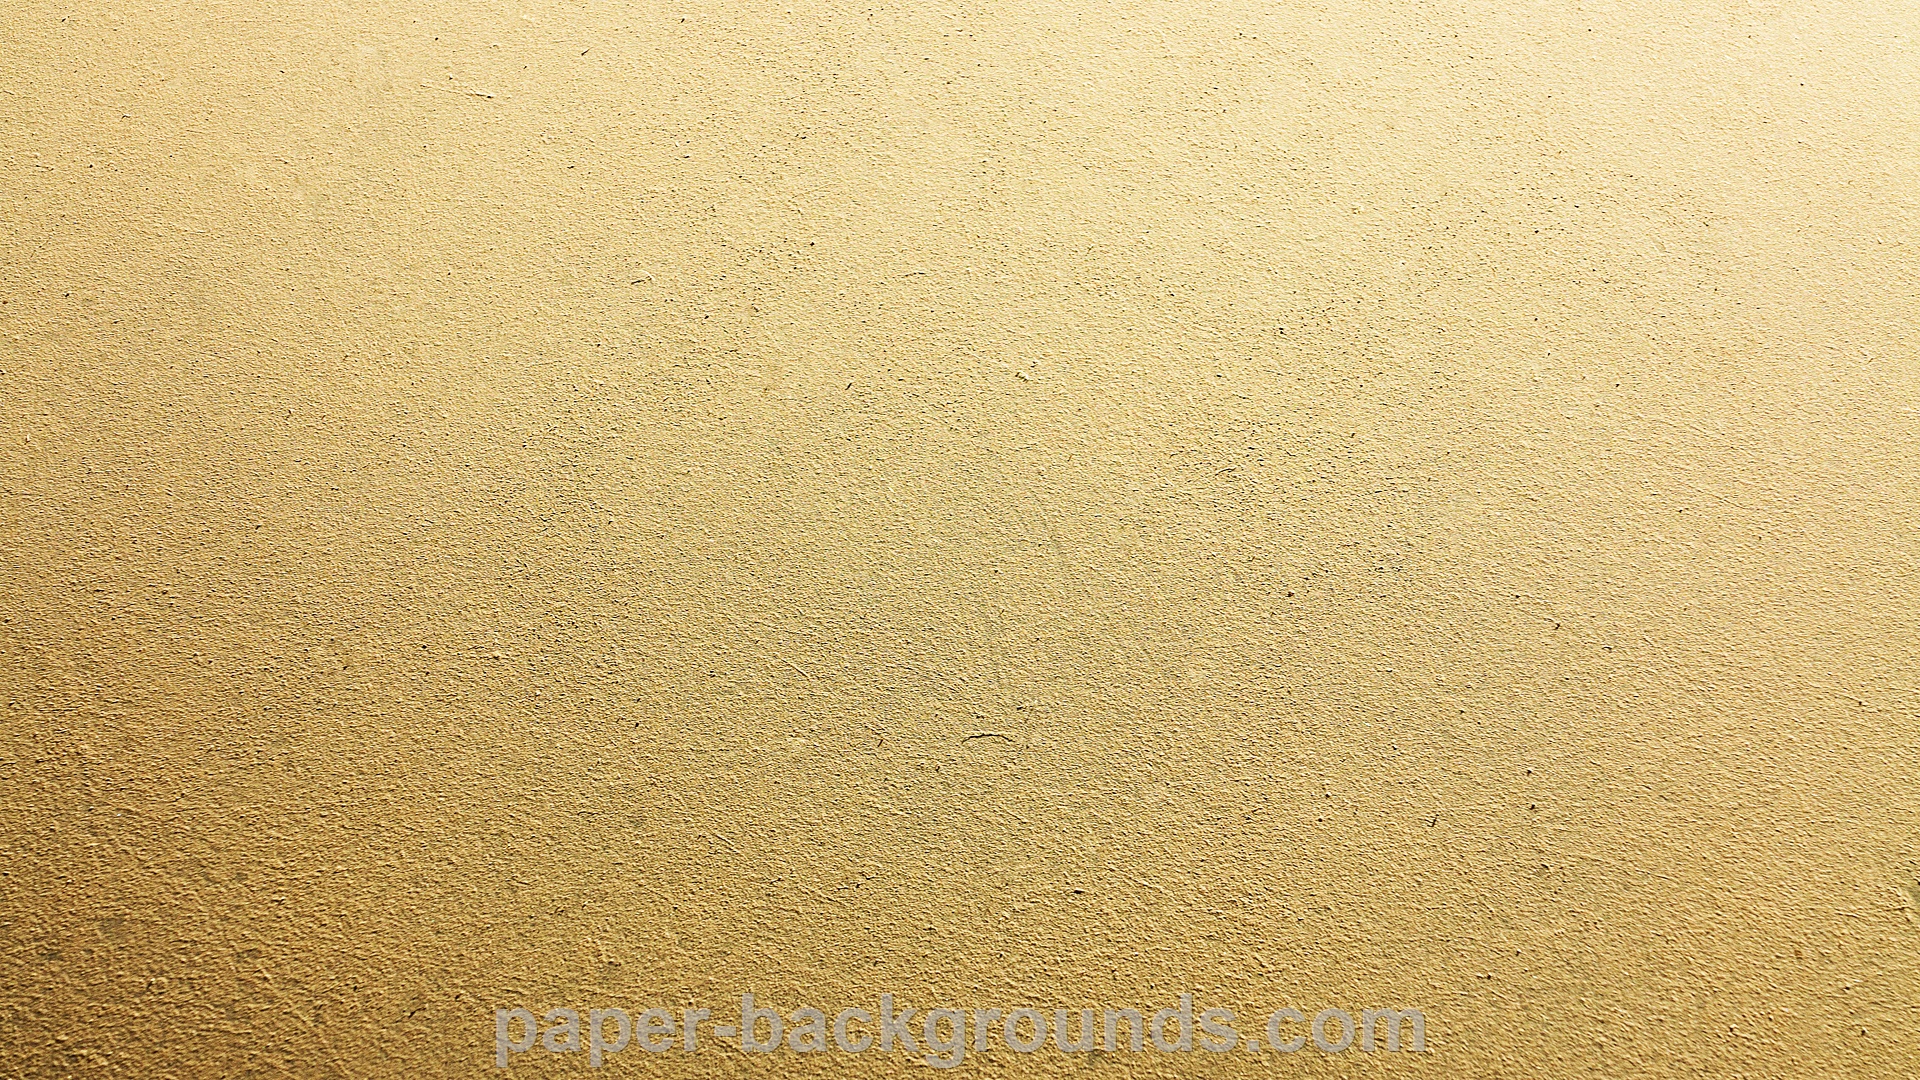 Free High Resolution Paper Backgrounds and Textures